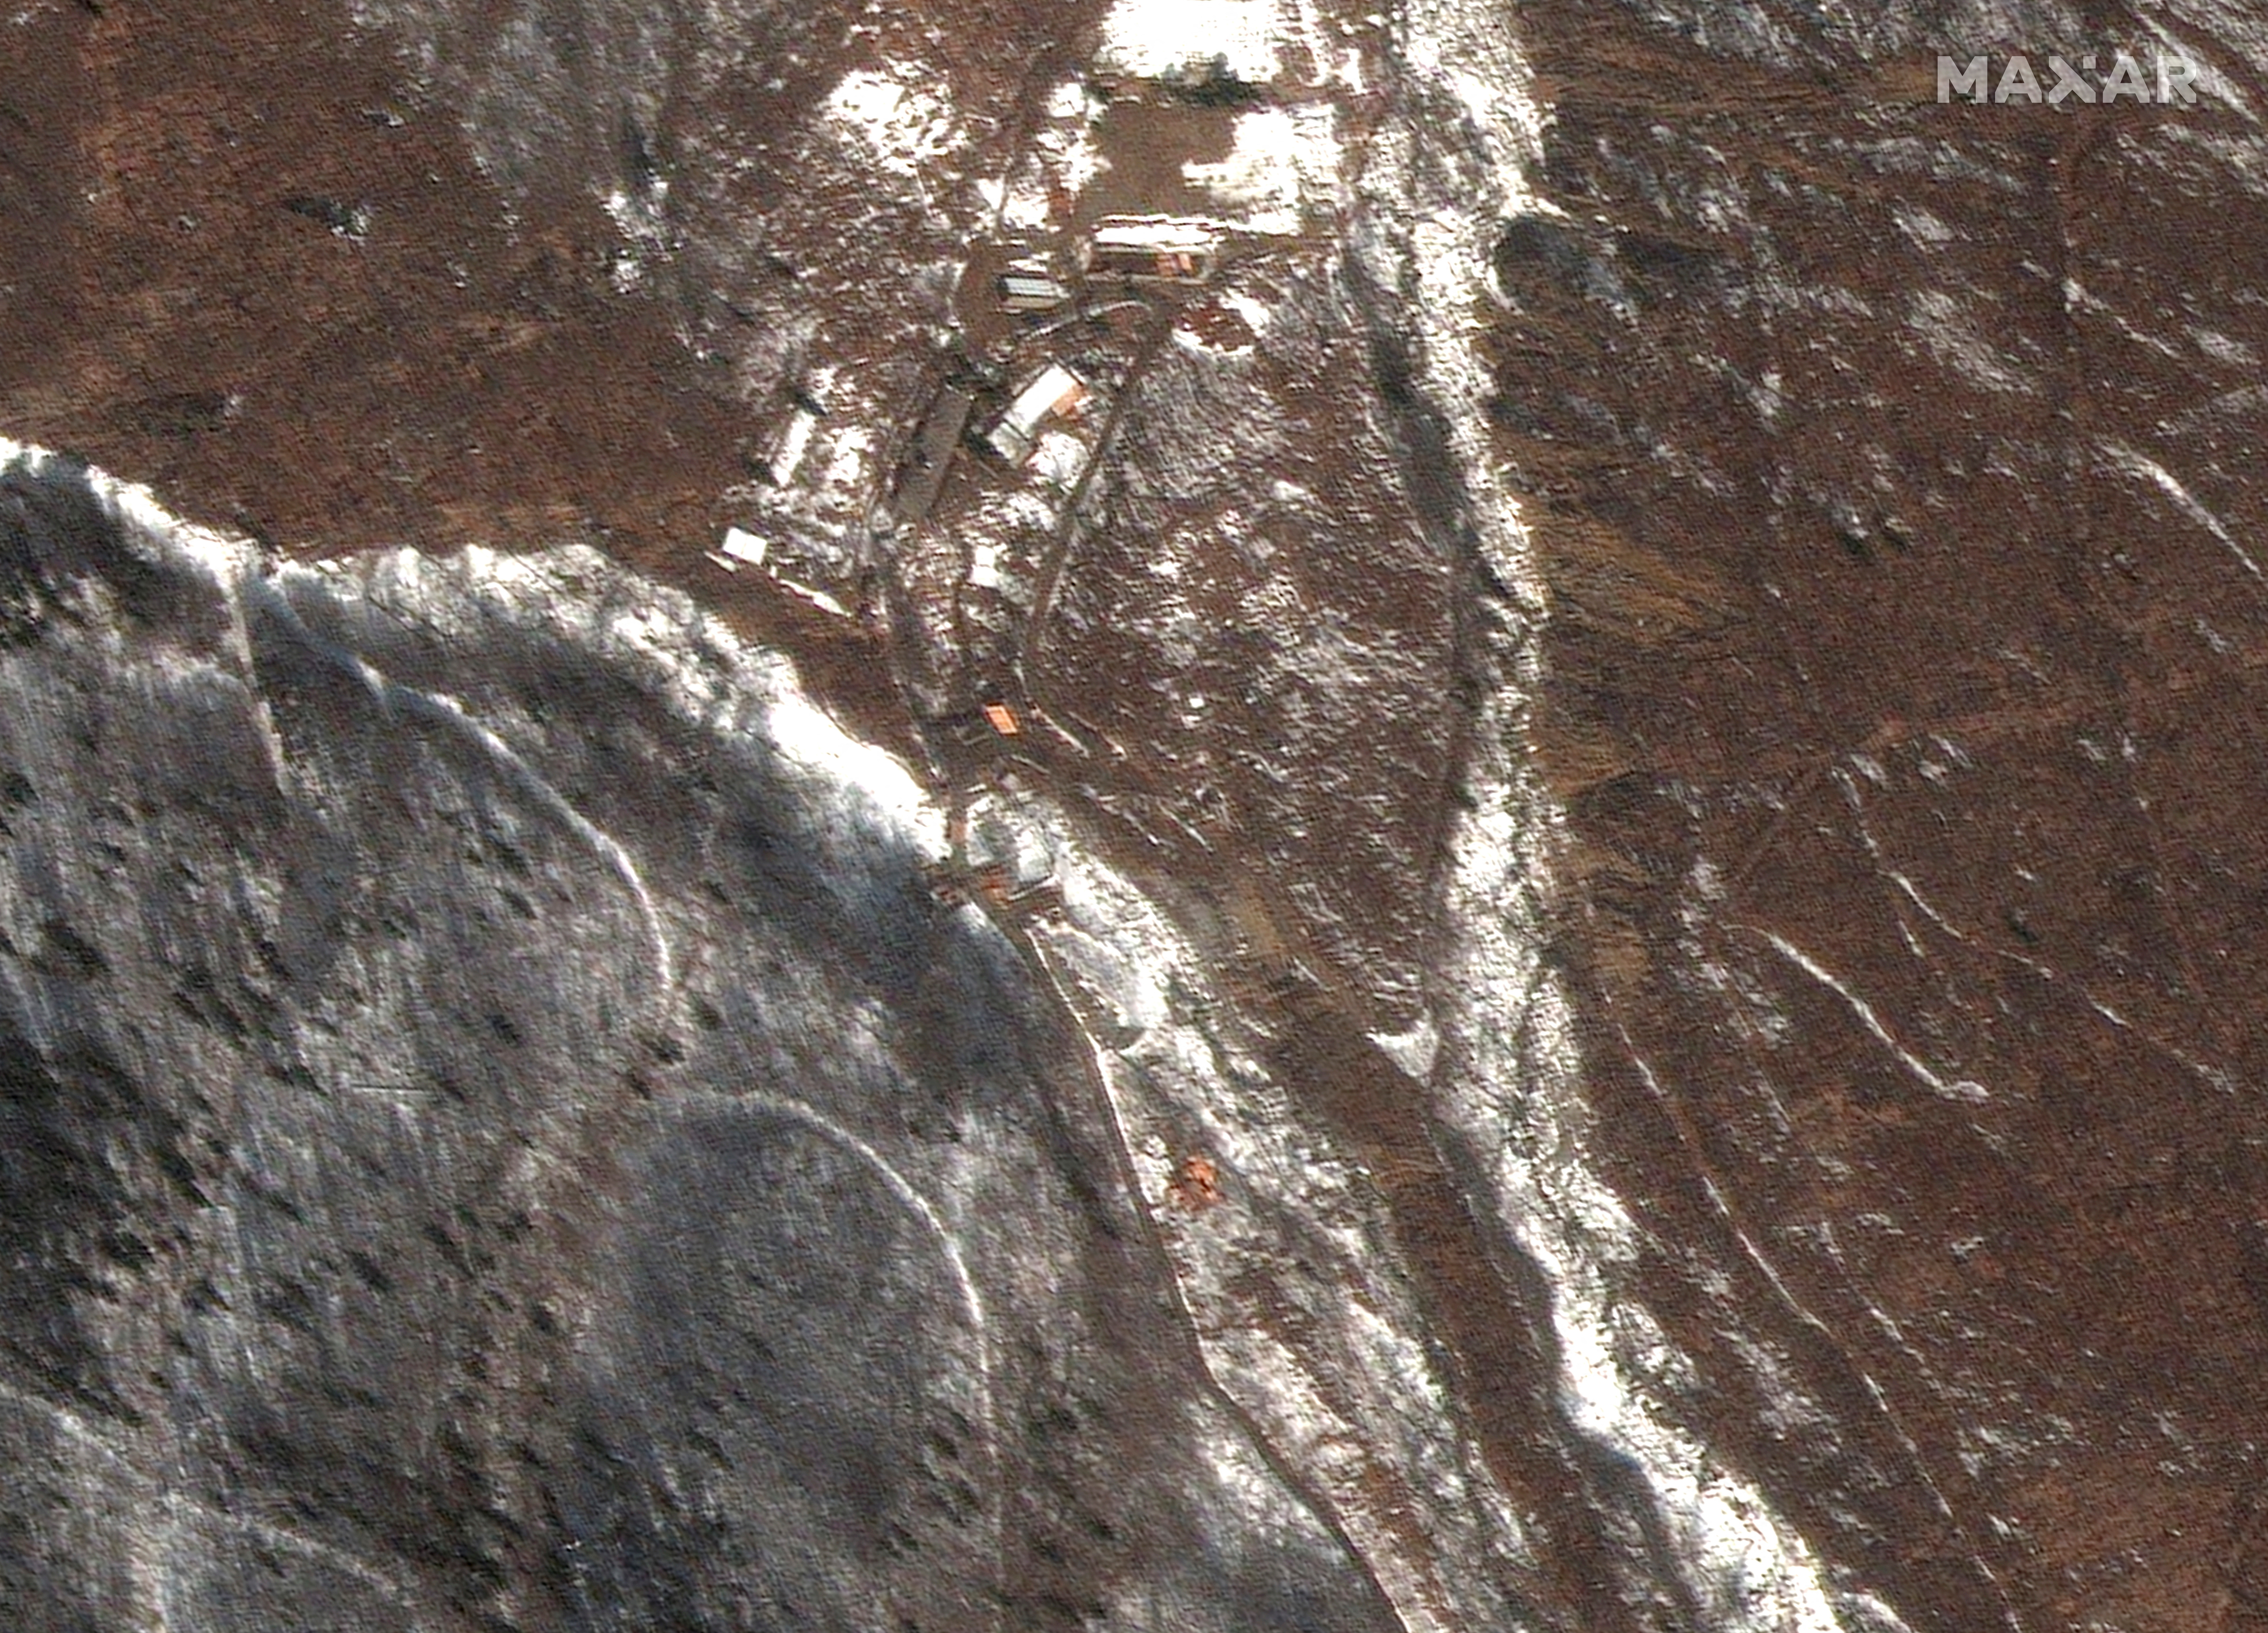 A satellite image shows new buildings in the Punggye-ri nuclear test site